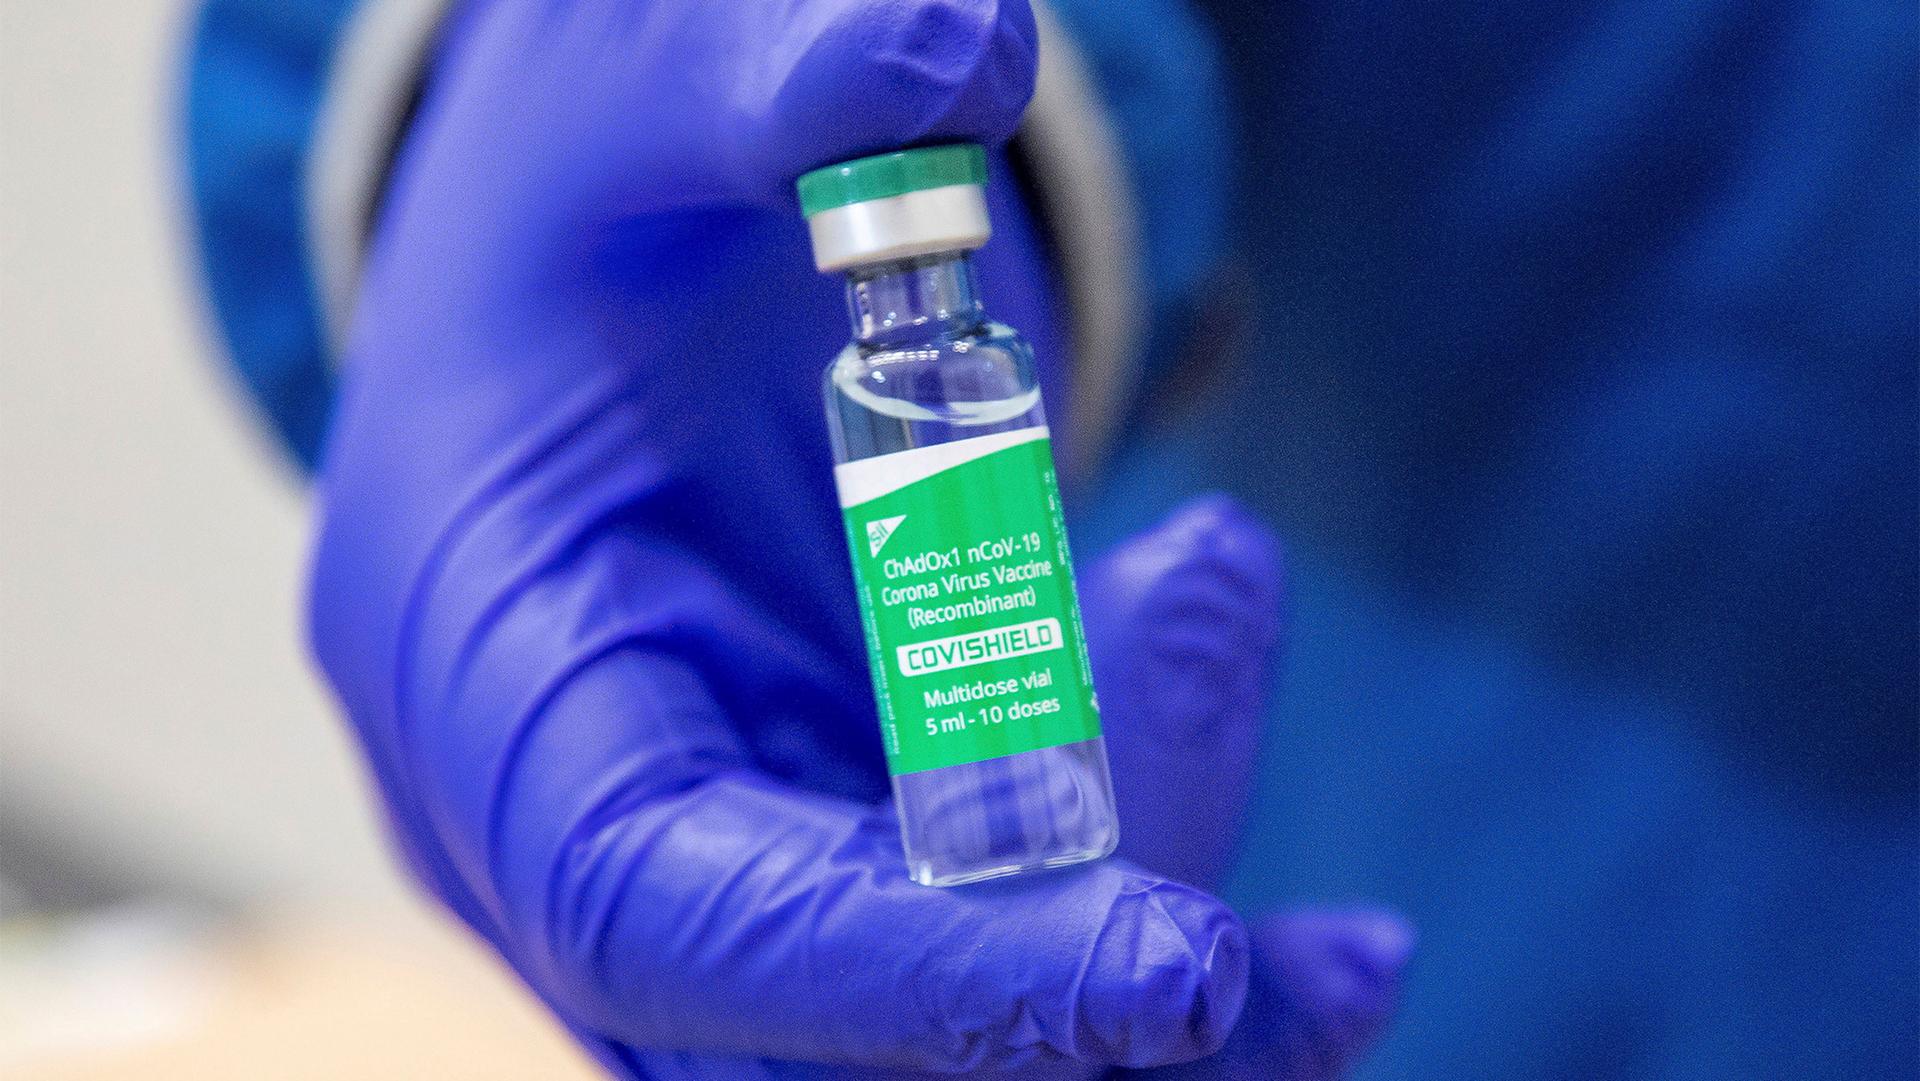 A person wearing blue gloves presents a vial of an AstraZeneca COVID-19 vaccine dose